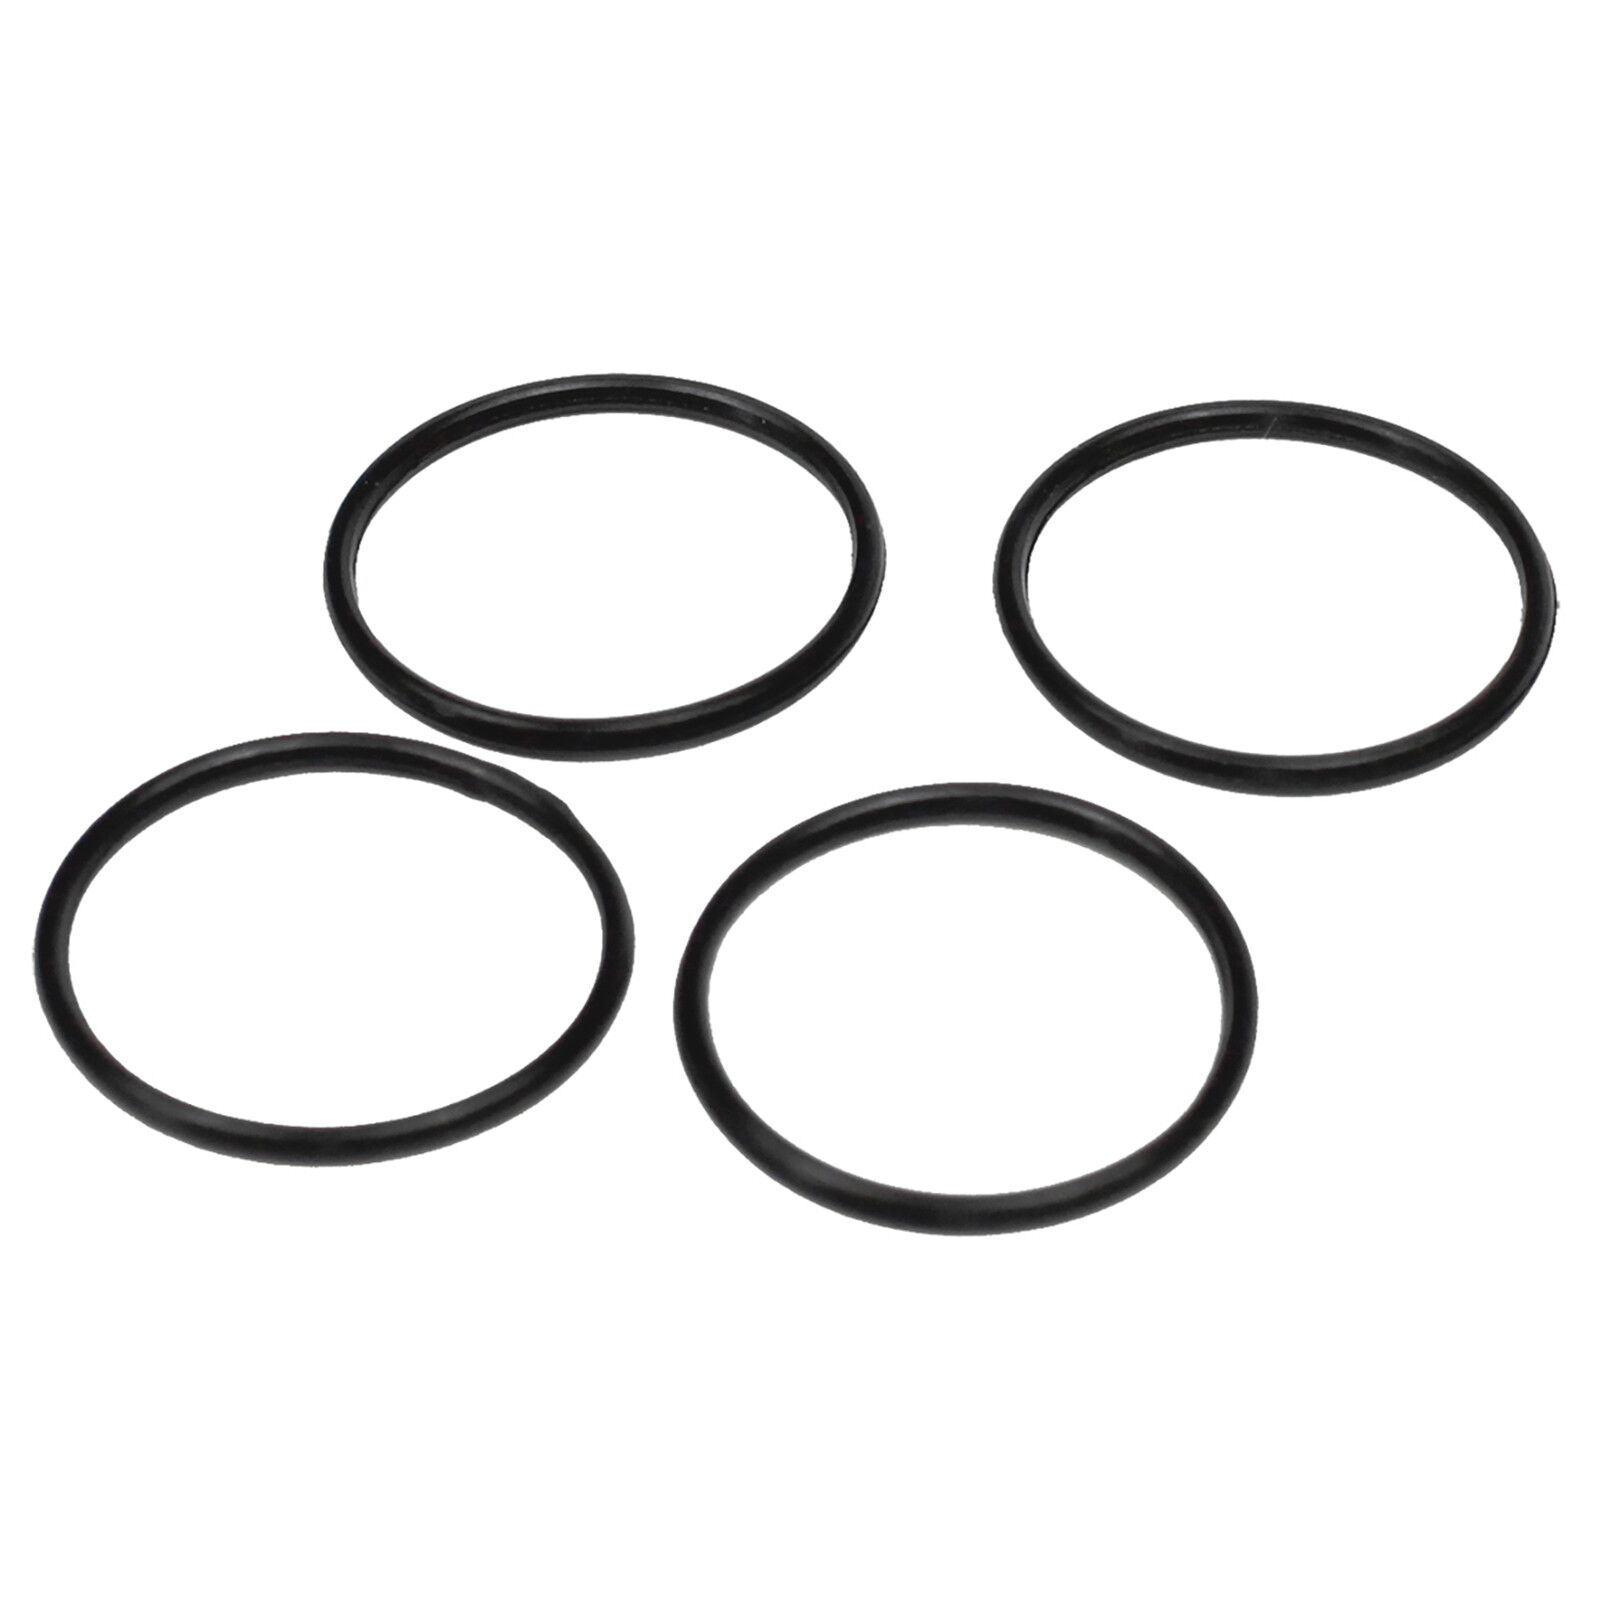 Dennerle - O-Ring Seal - Scaper's Flow - 4x